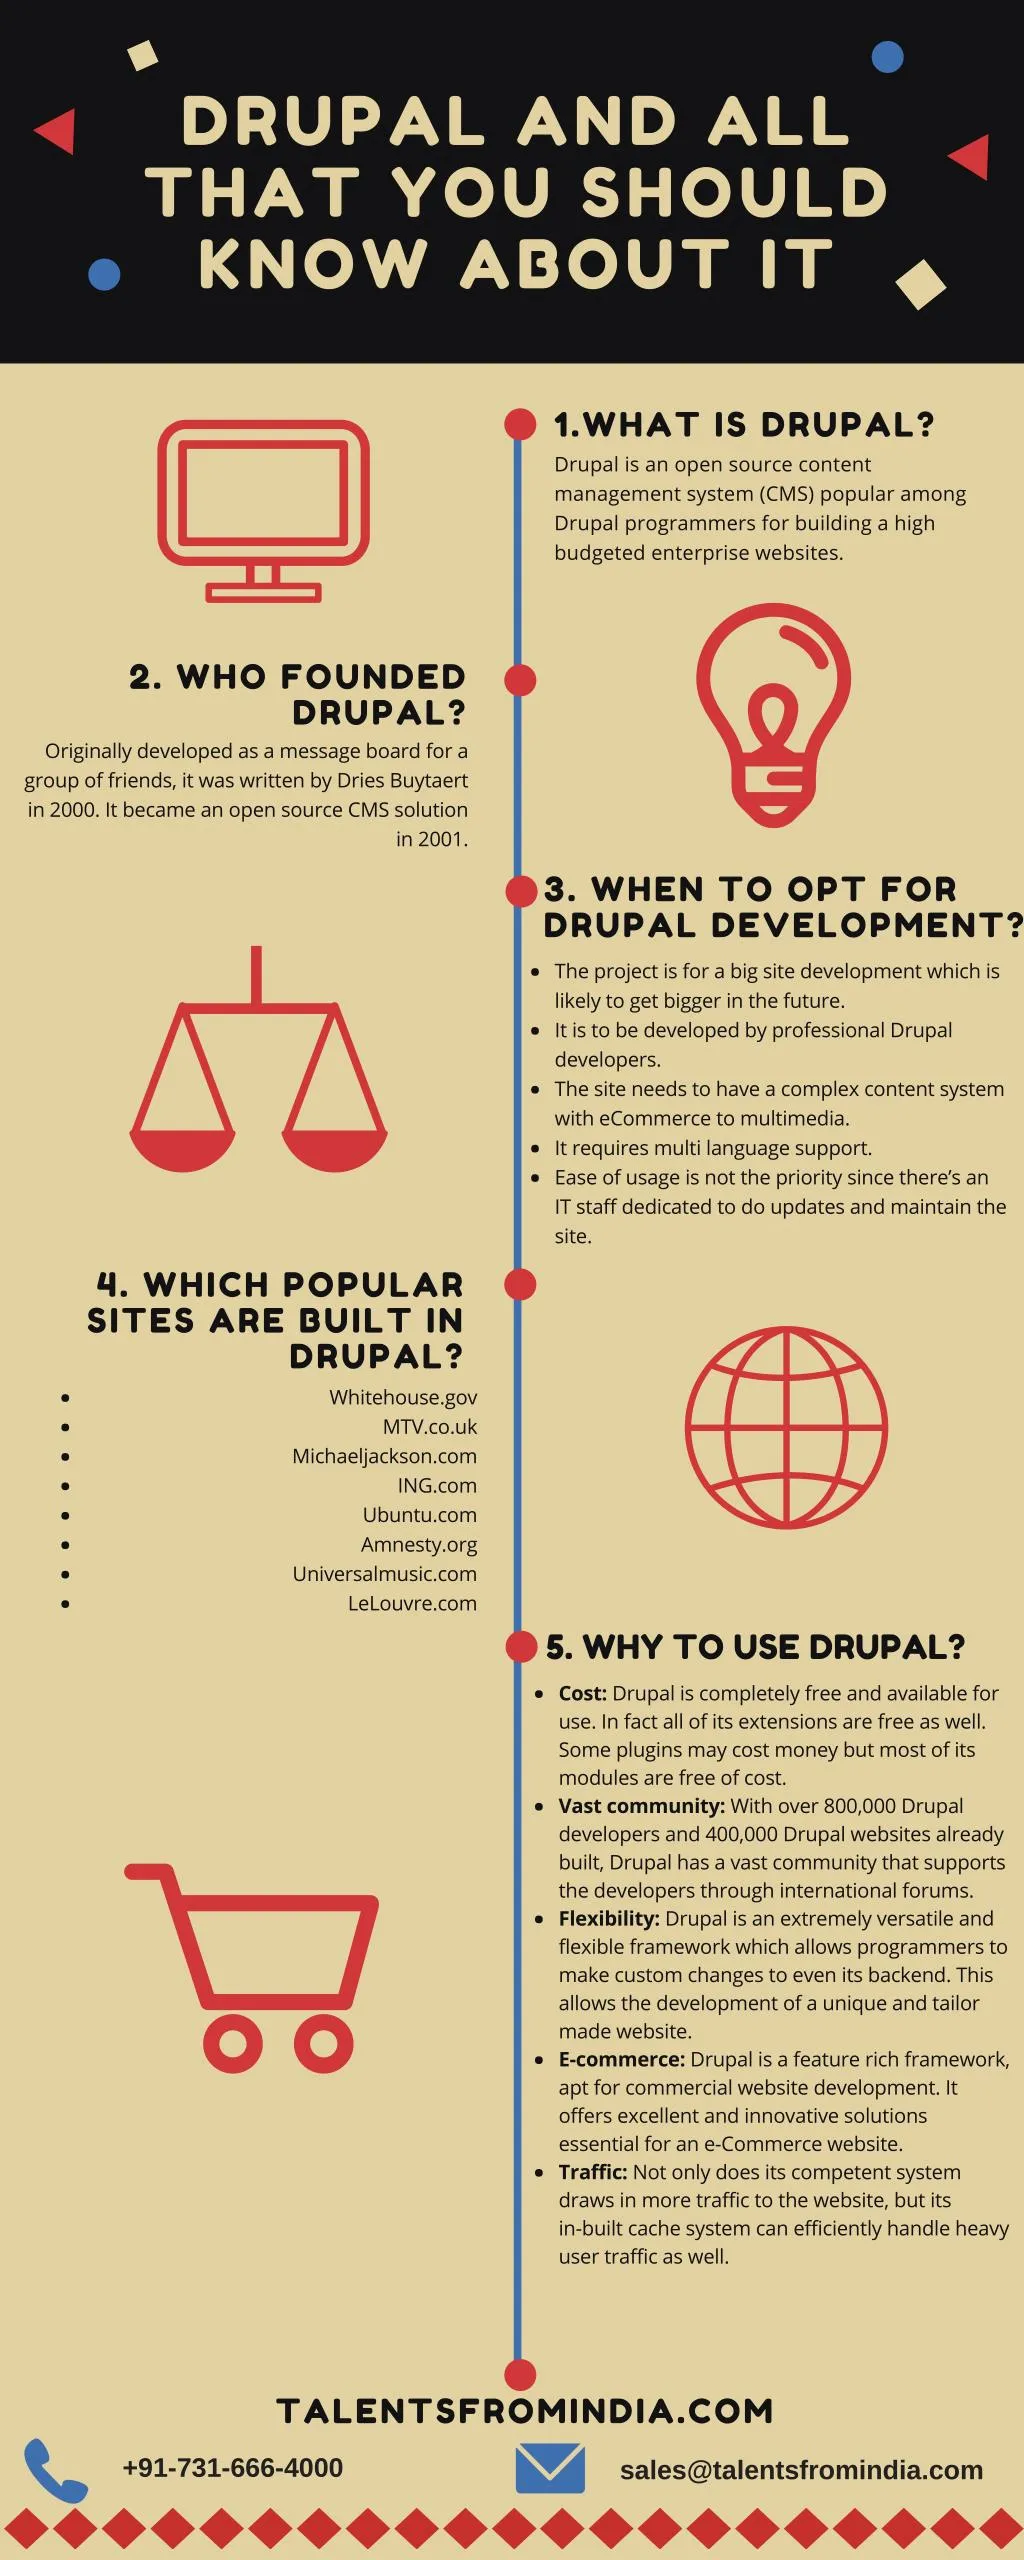 drupal and all that you should